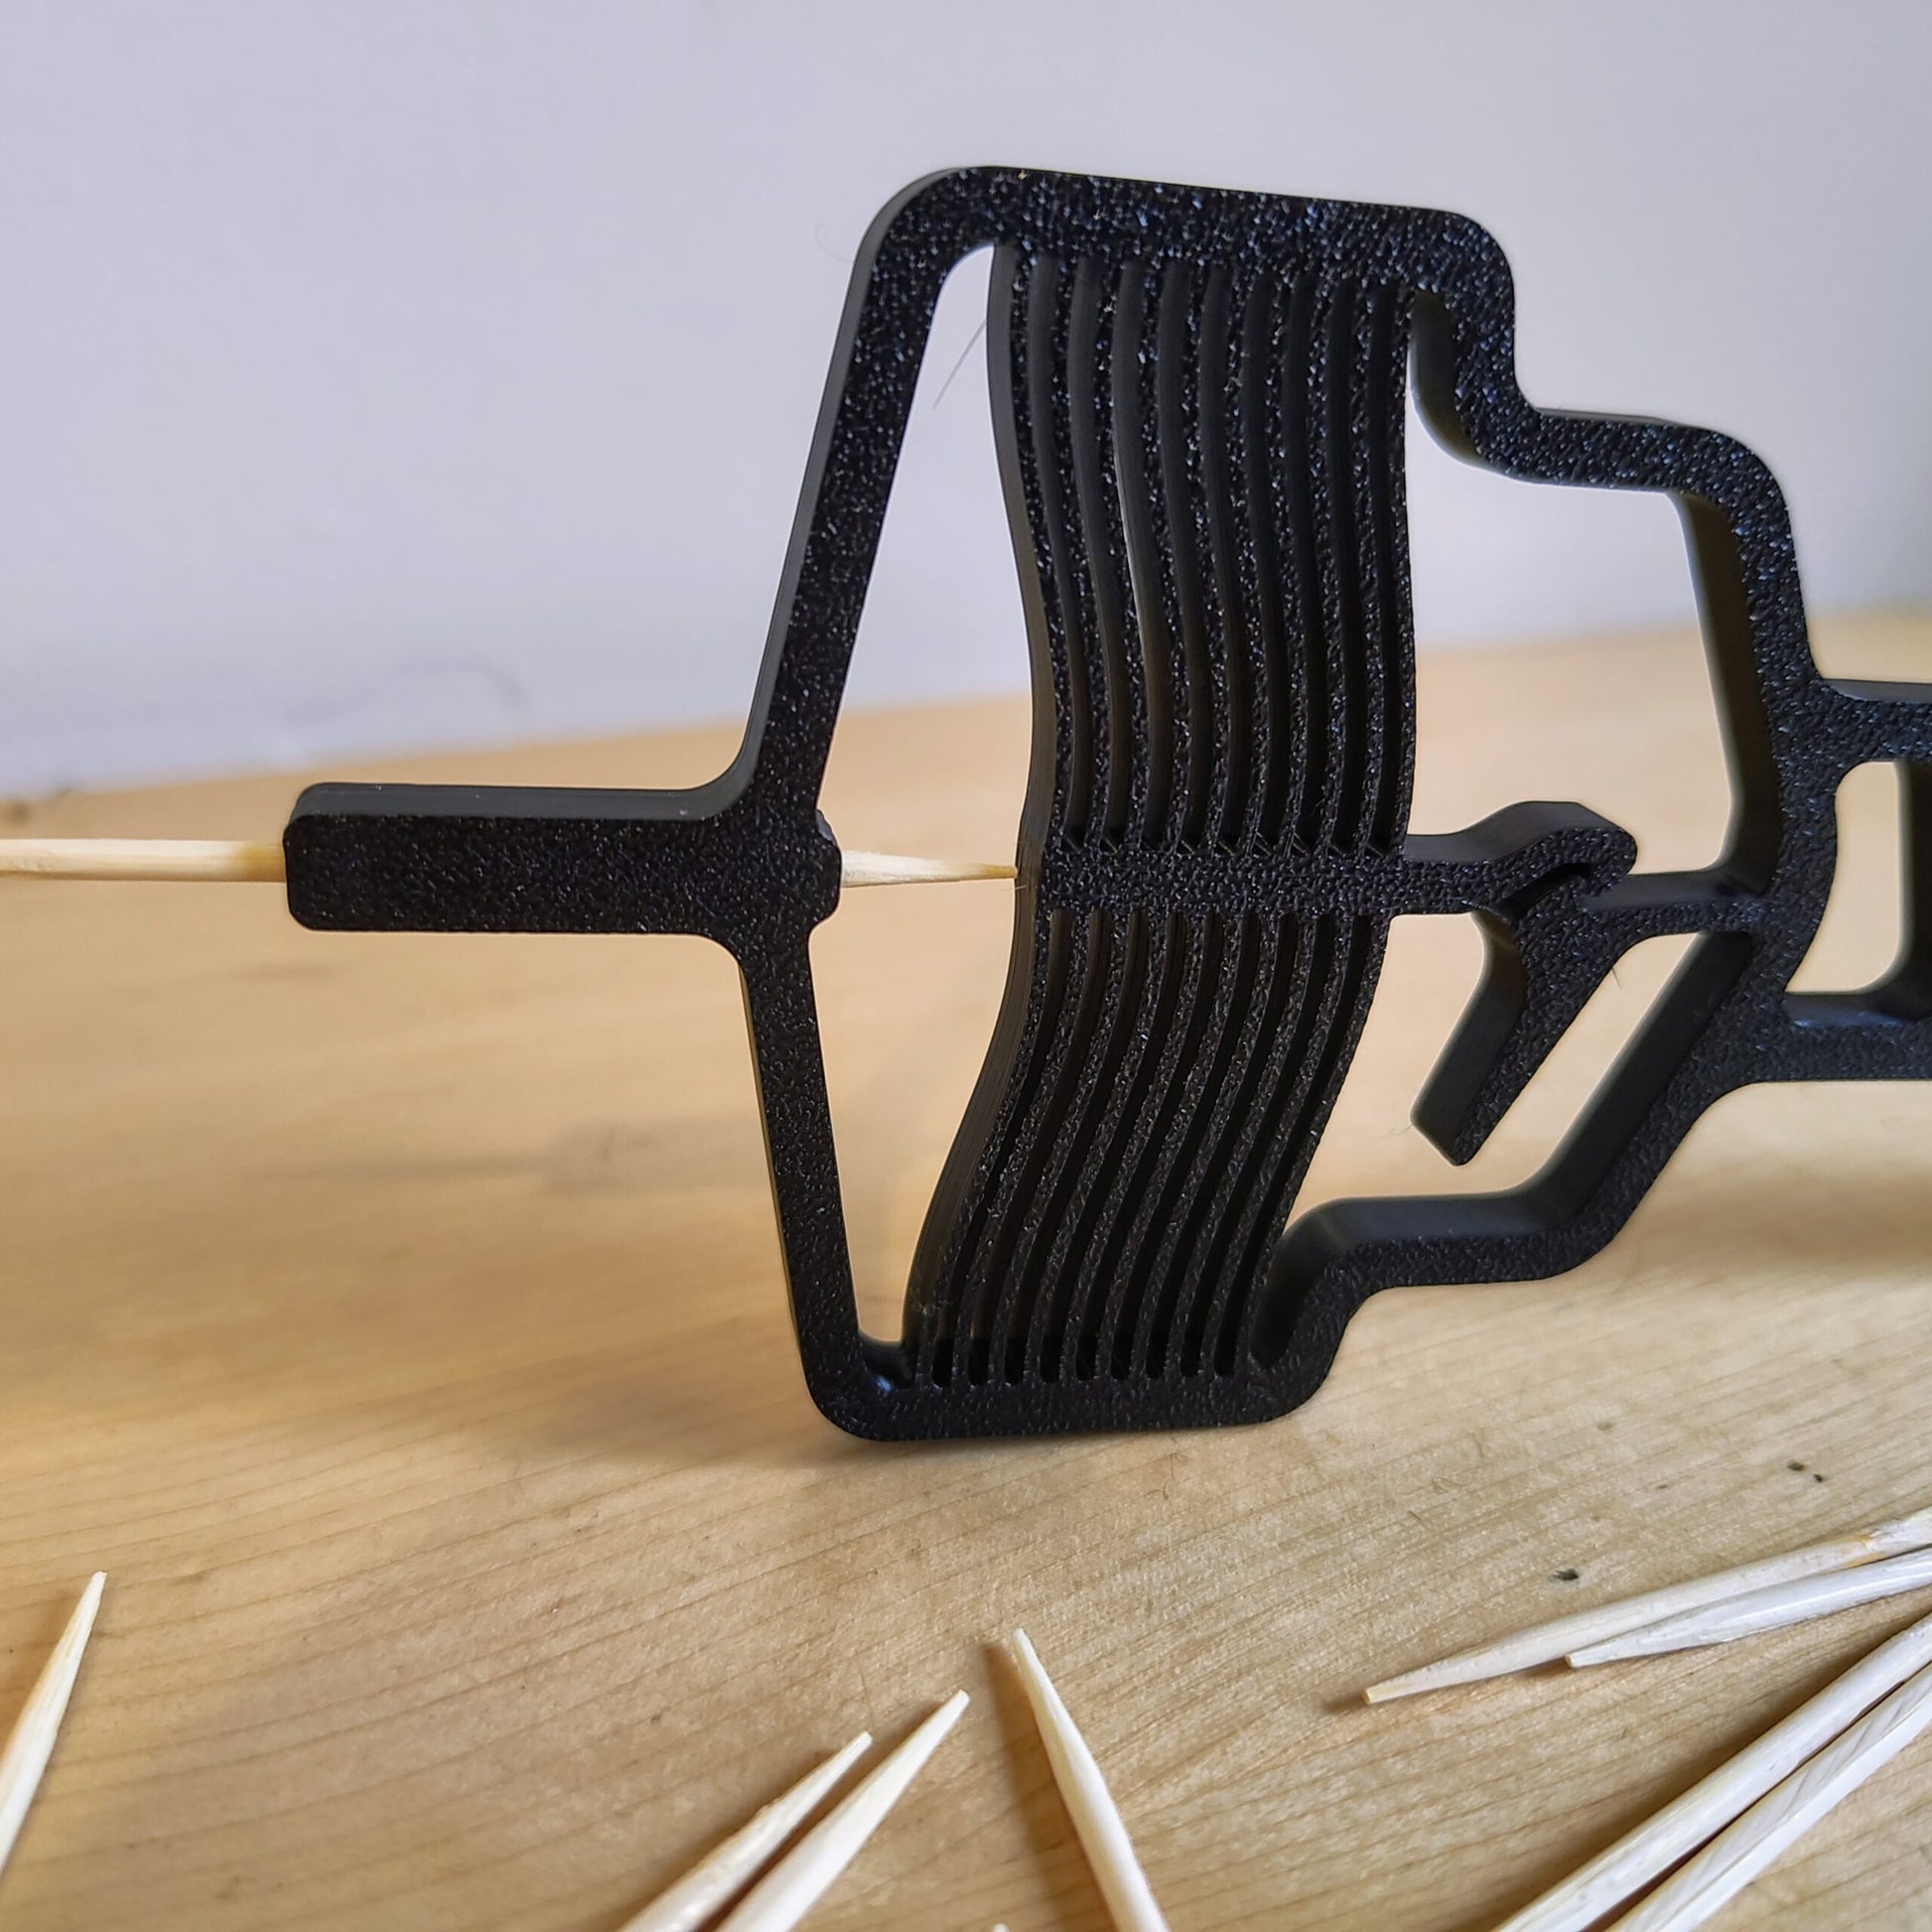 3d-printed-toothpick-launcher